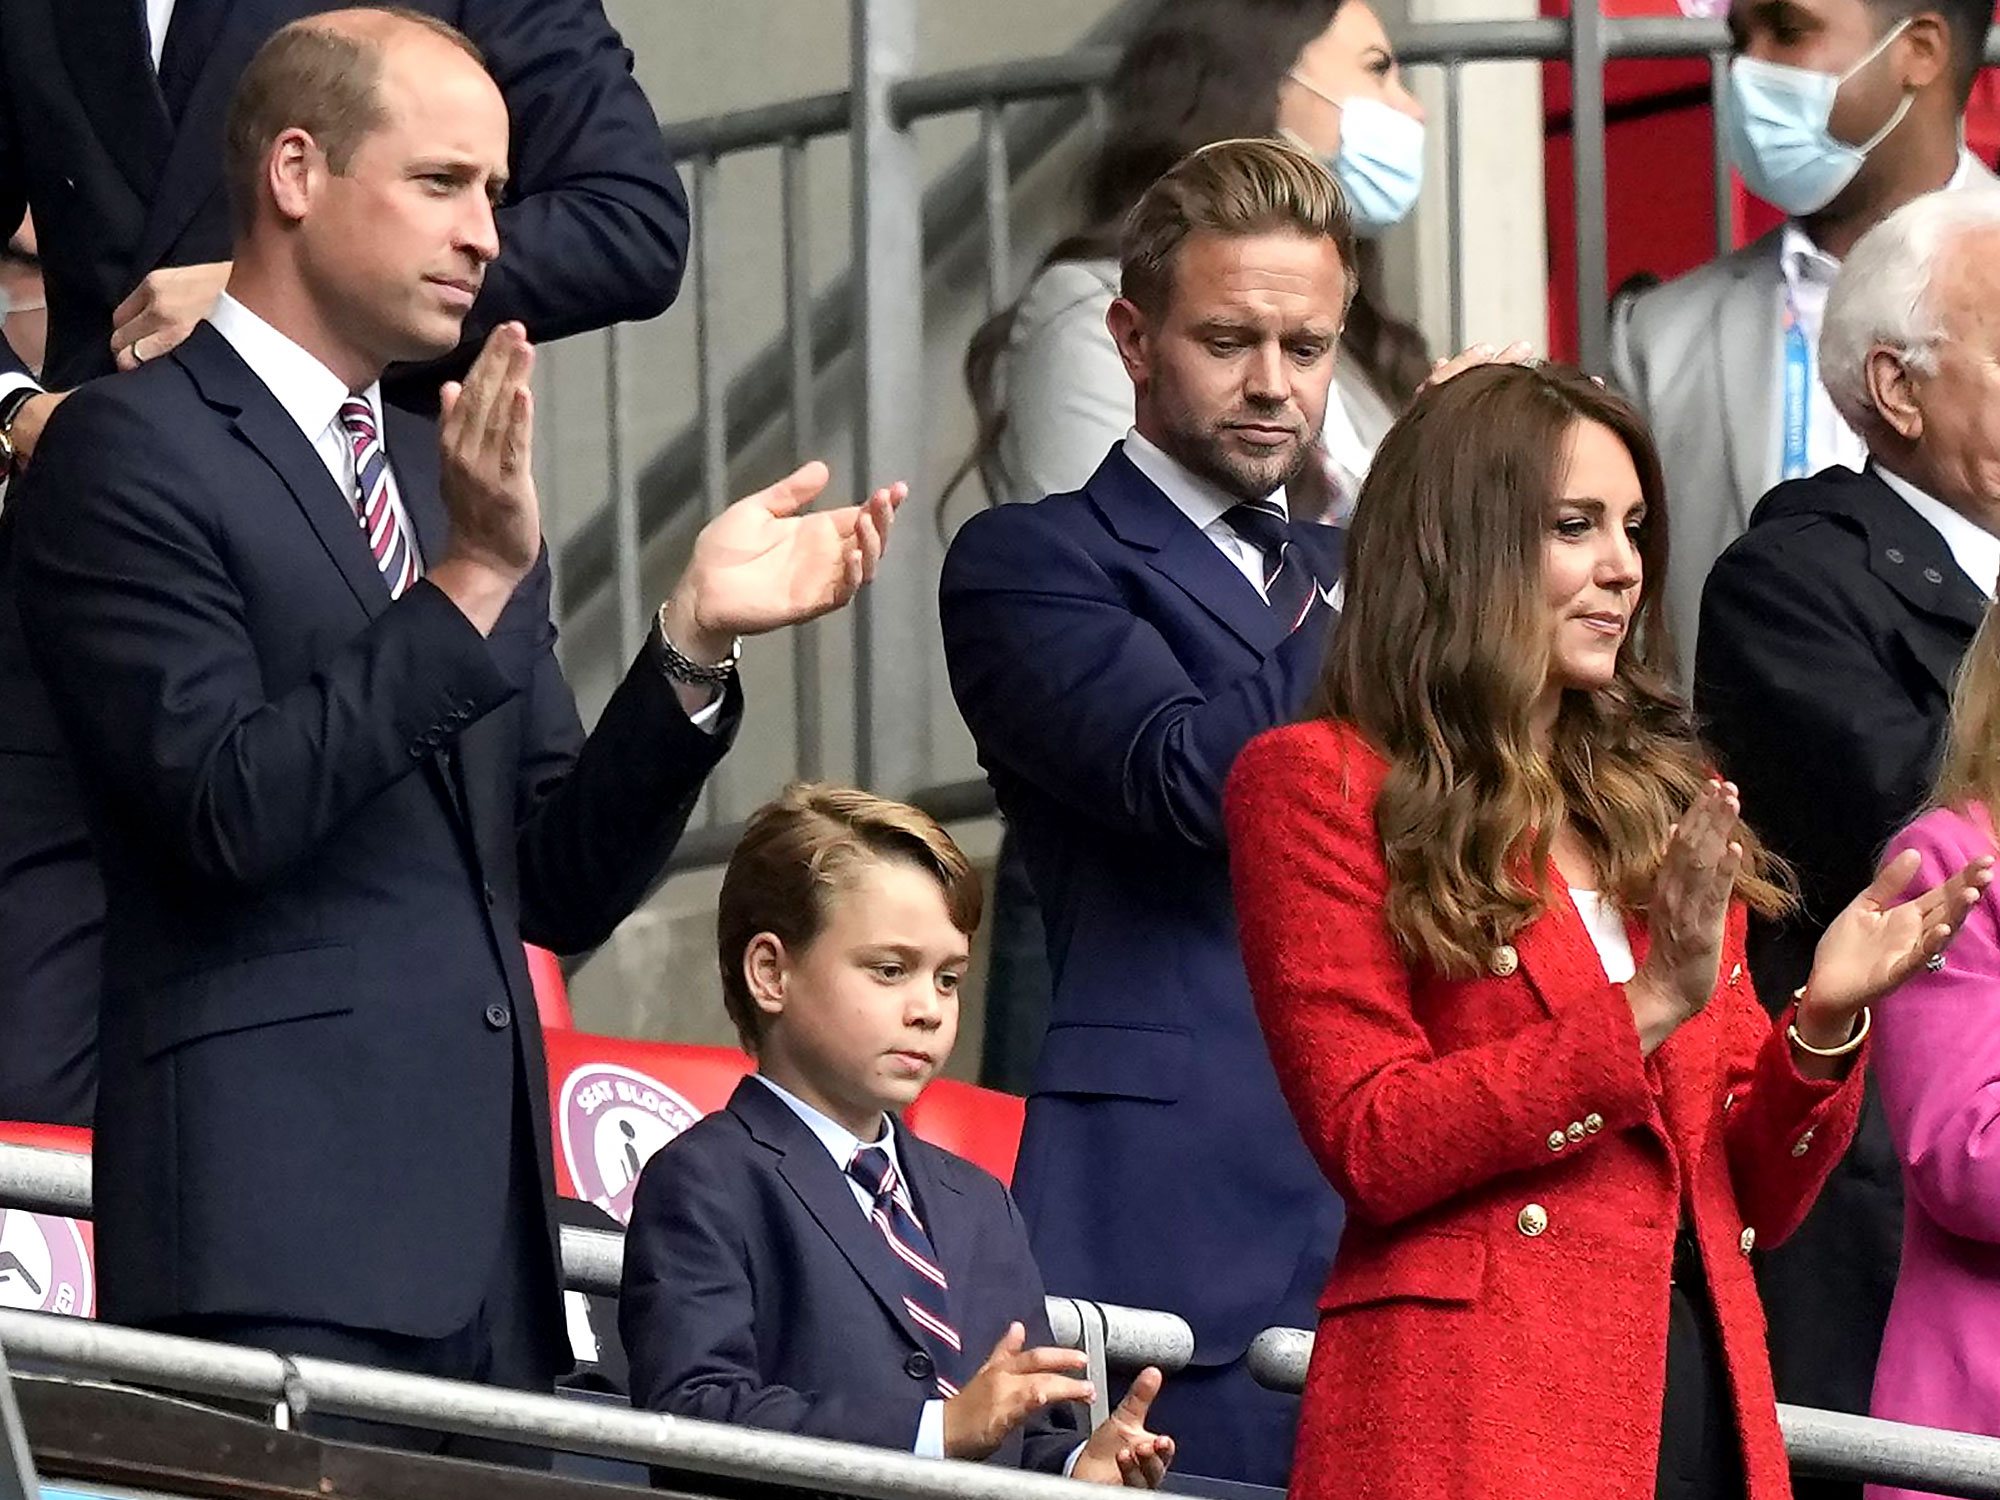 Prince William, George Wear Matching Suits at Soccer Game: Photos